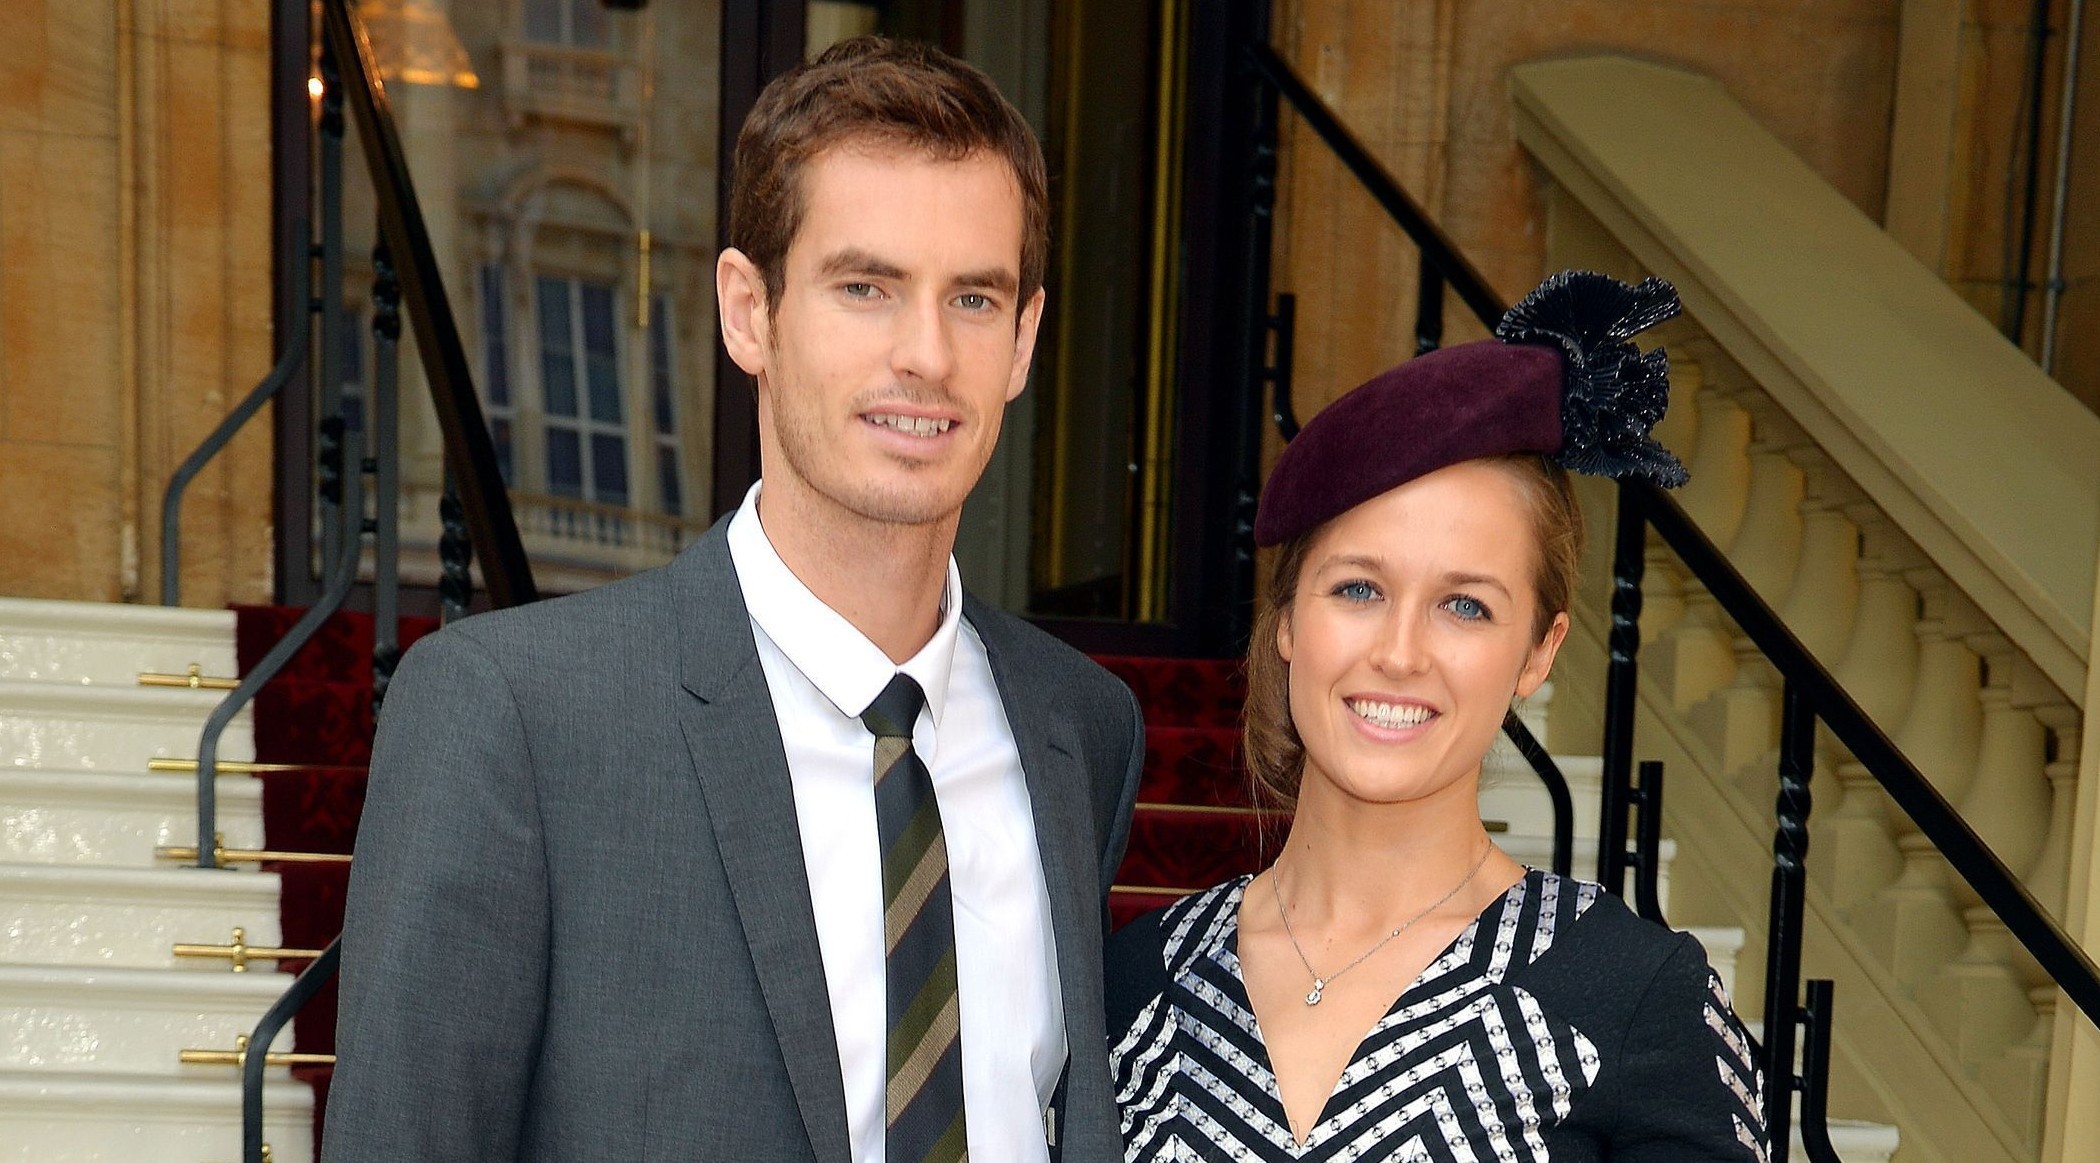 Andy Murray and Kim Sears (John Stillwell/PA Wire)